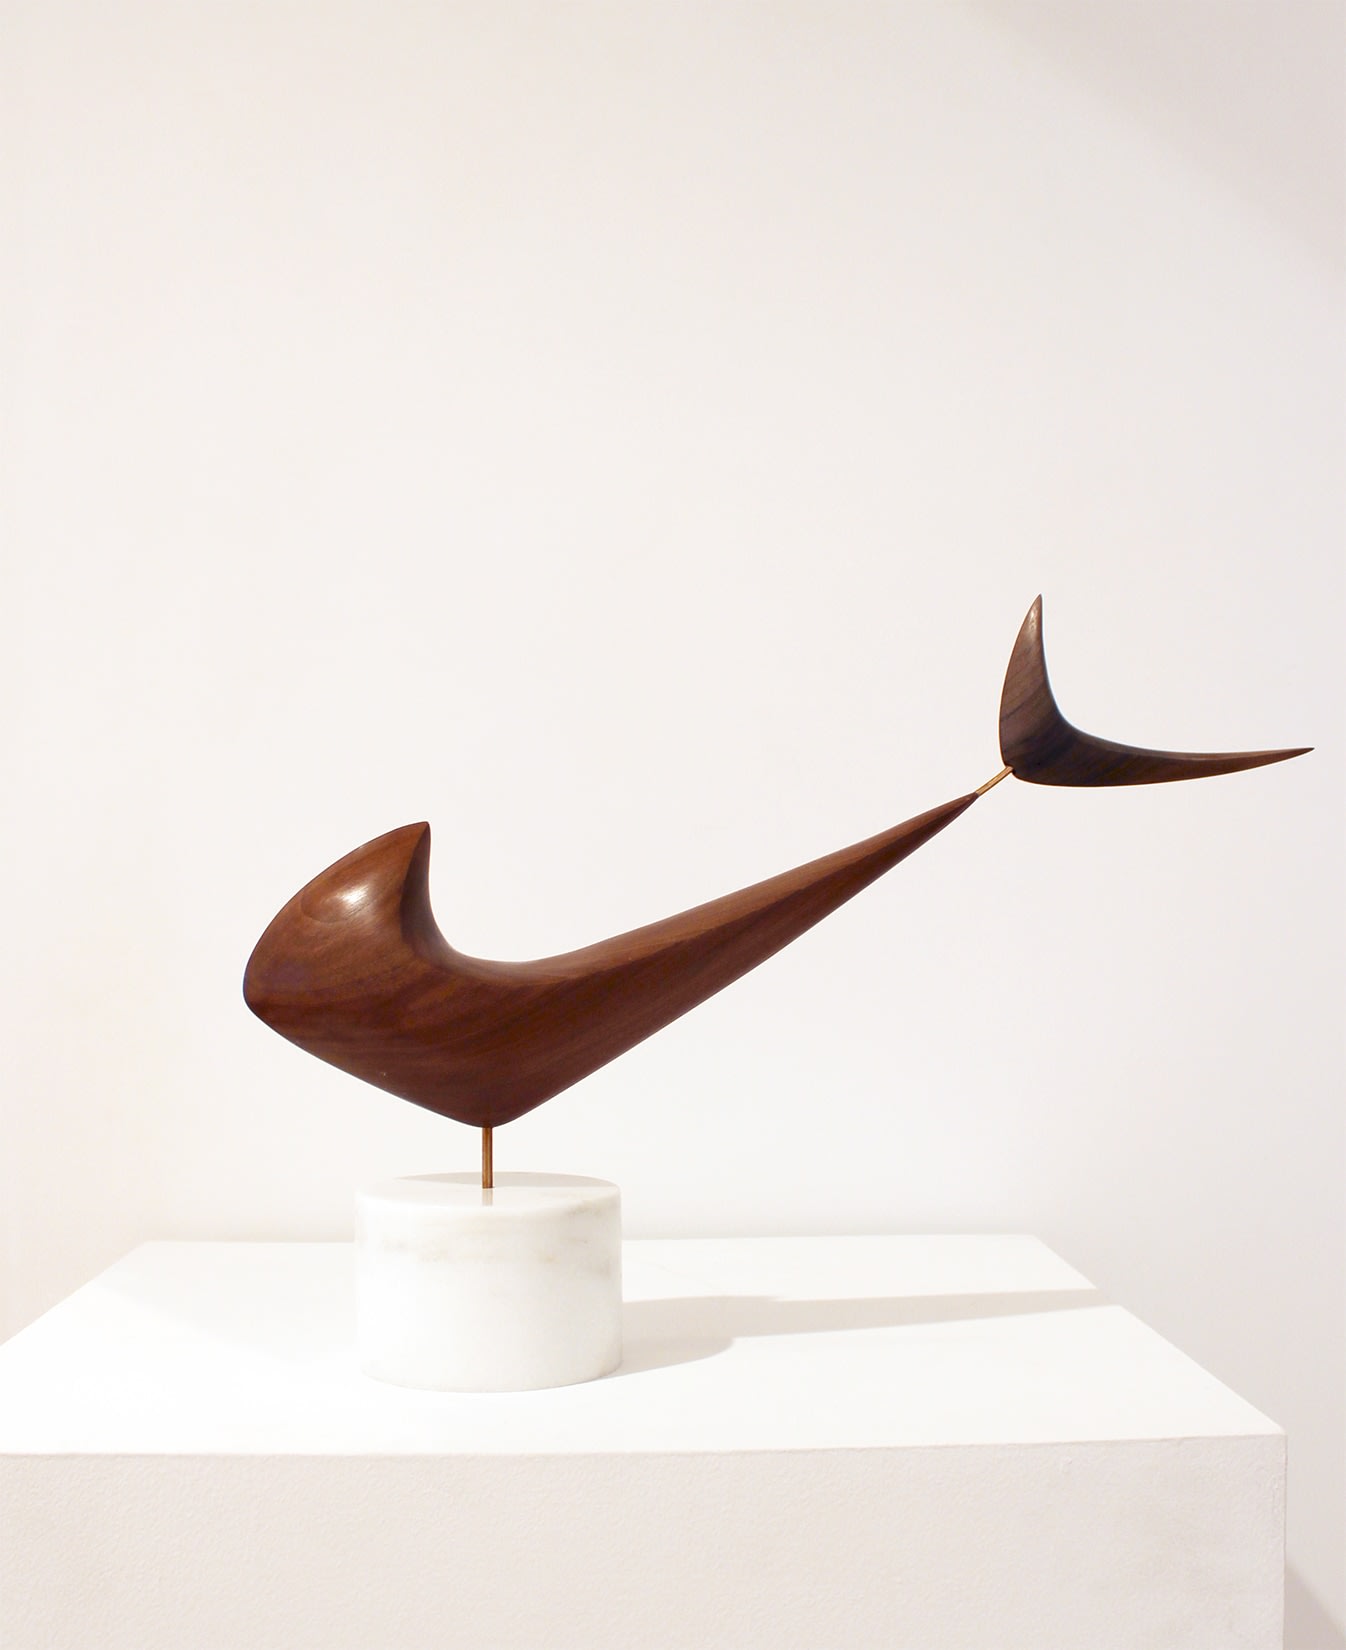 Abstract Fish IV, 2015 Walnut and bronze on marble base 14 x 4.5 x 19 inches